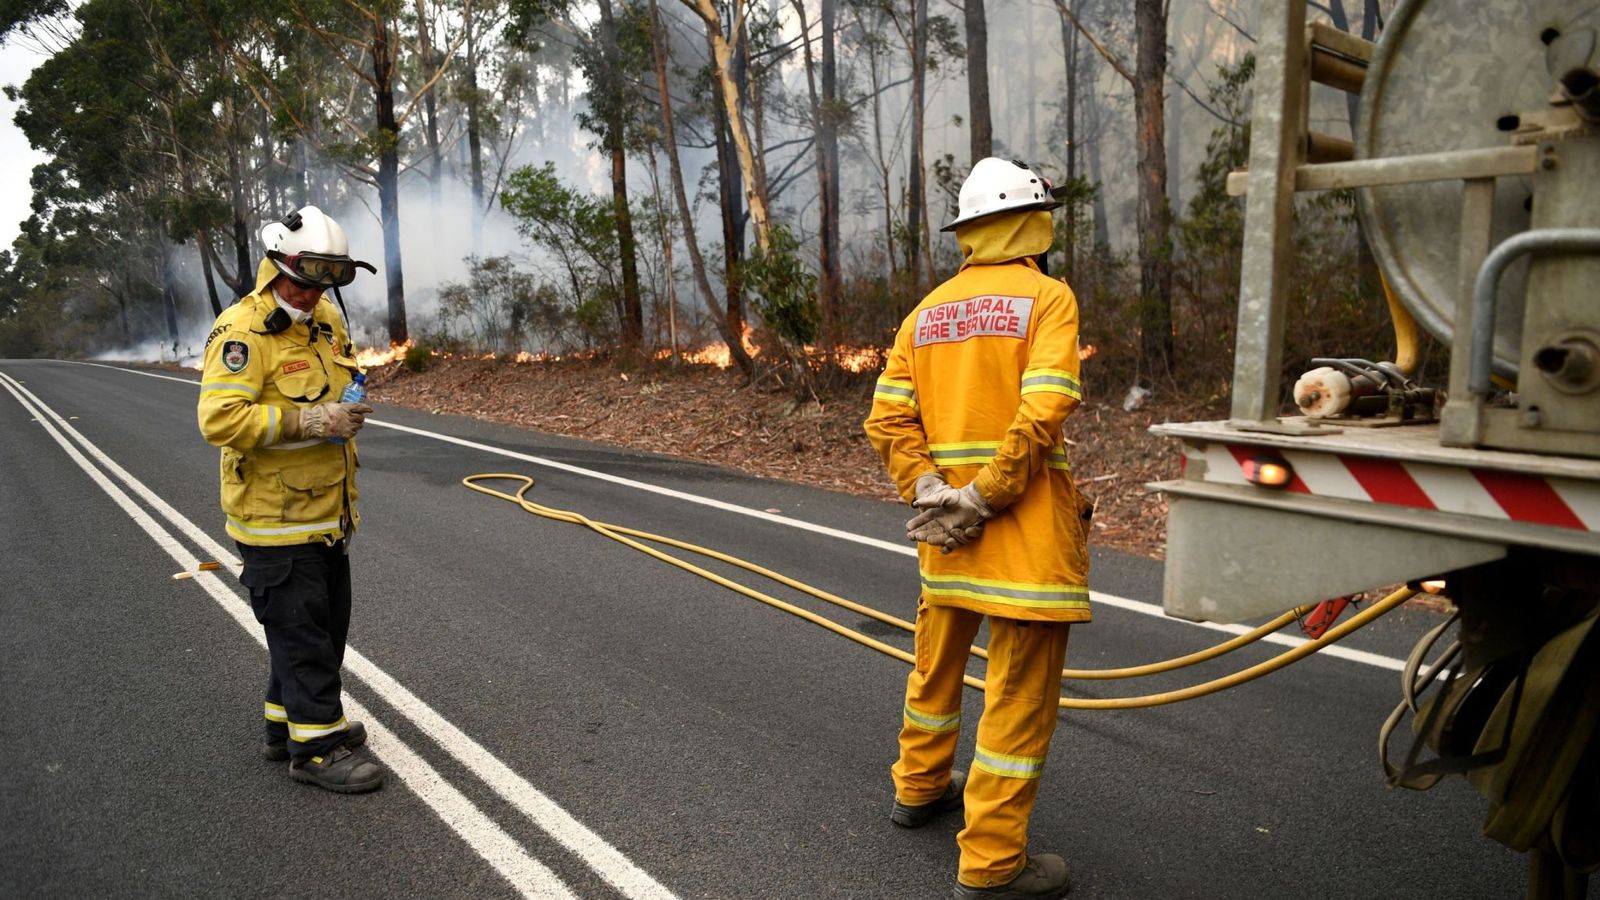 Celebrities and business leaders help to raise millions to fund firefighting operations